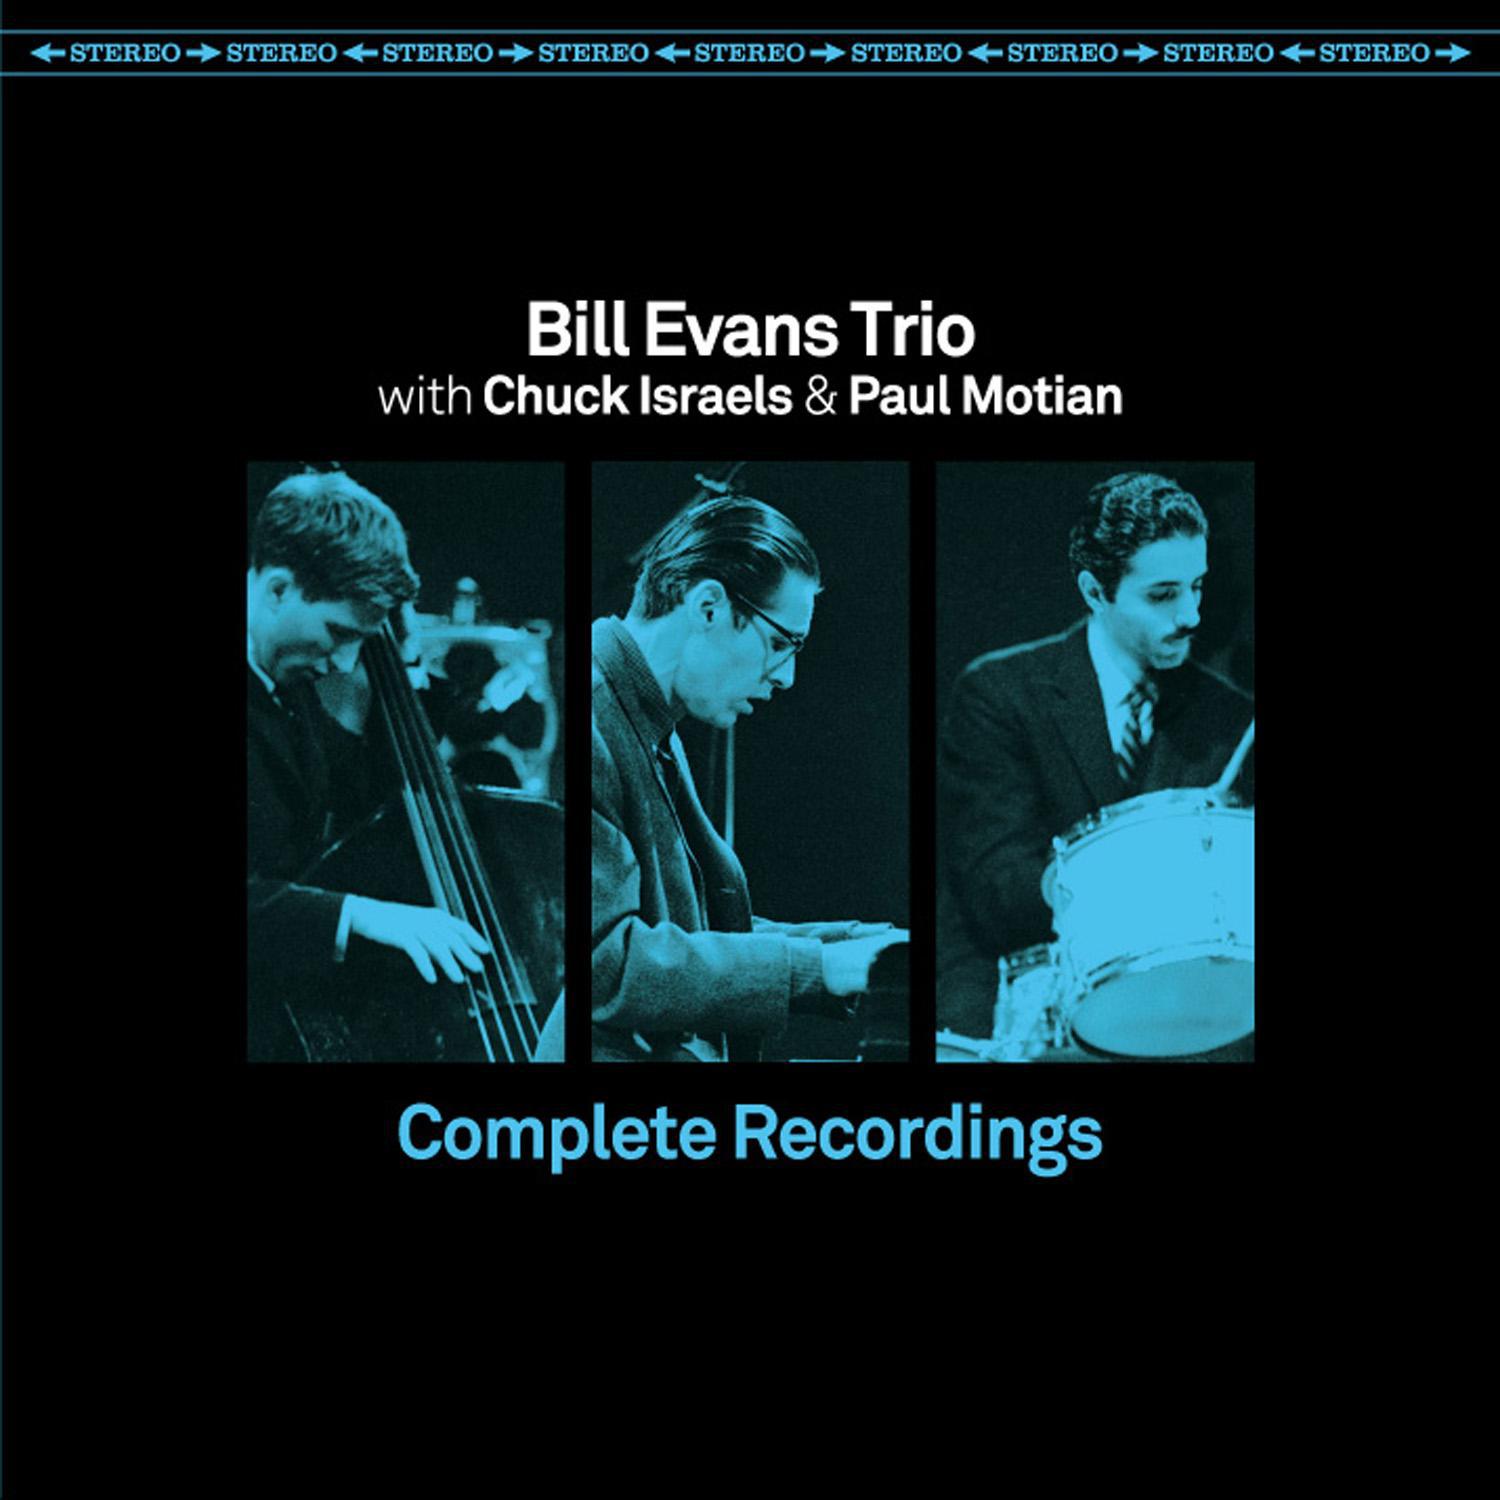 Complete Recordings (with Chuck Israels & Paul Motian)